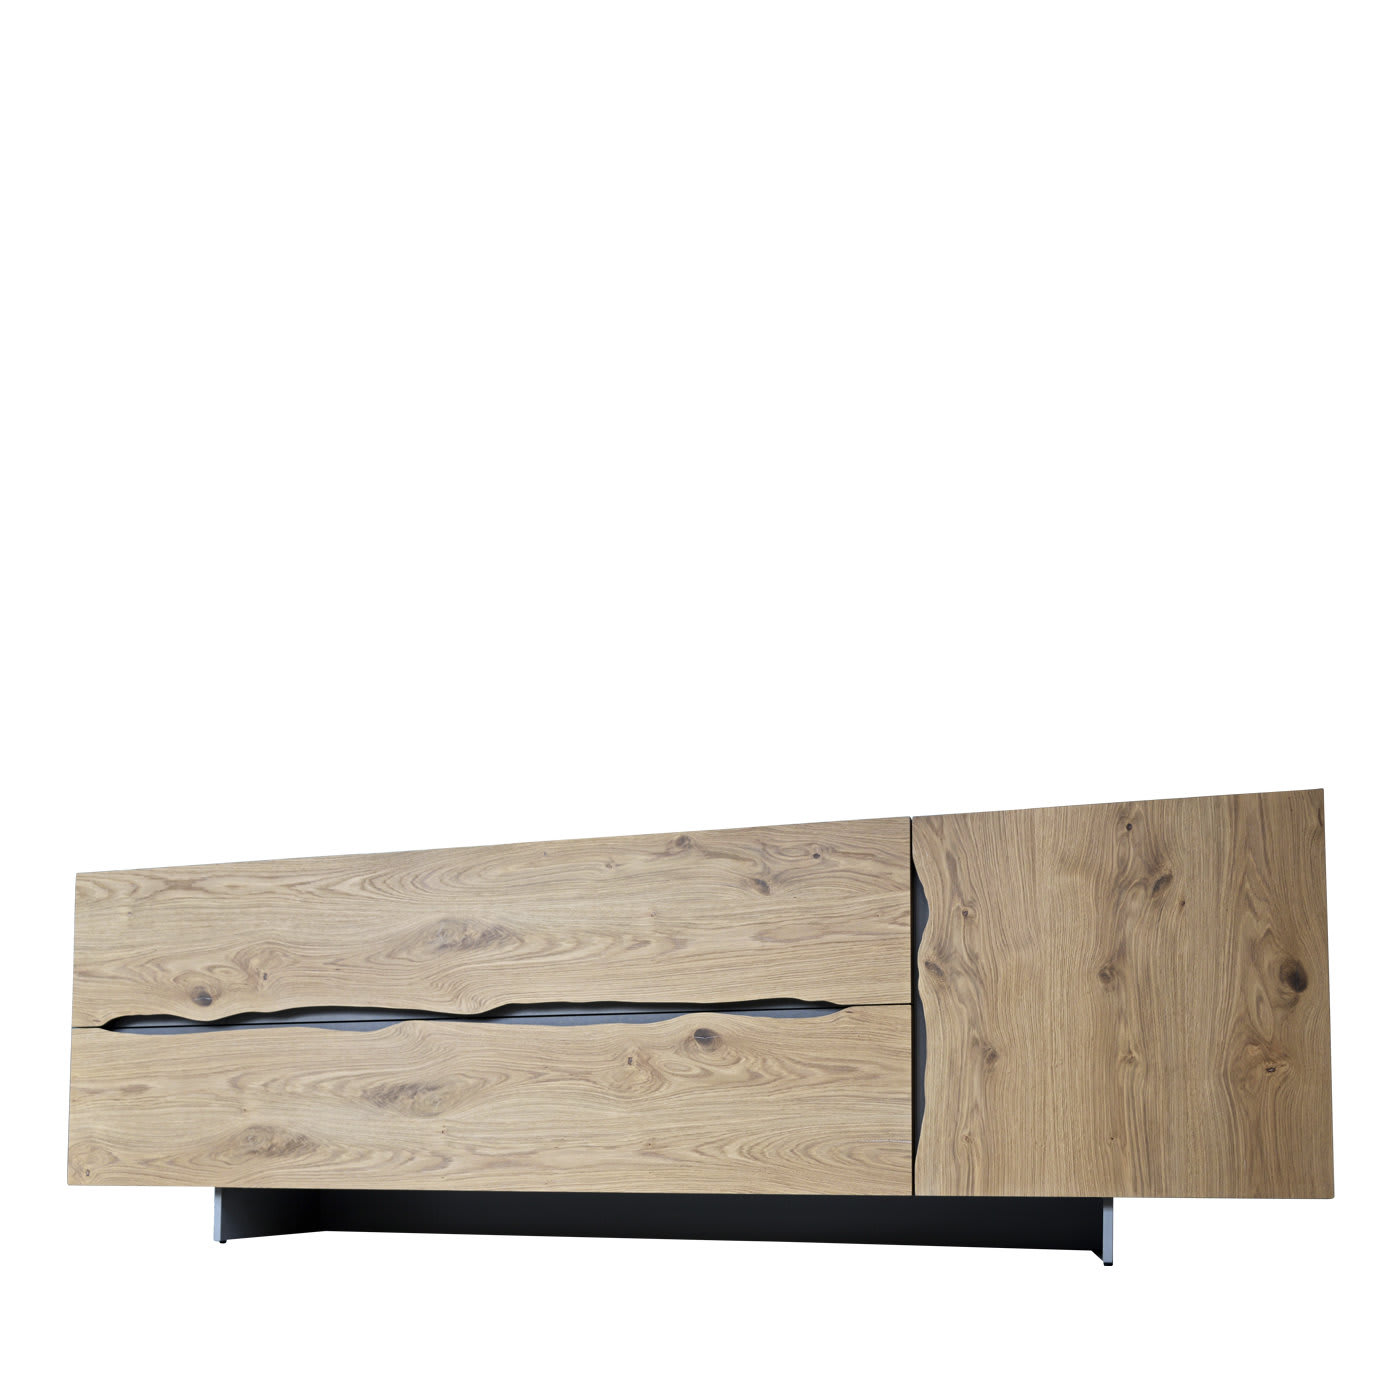 DNA One Sideboard - Frigerio Paolo & C.